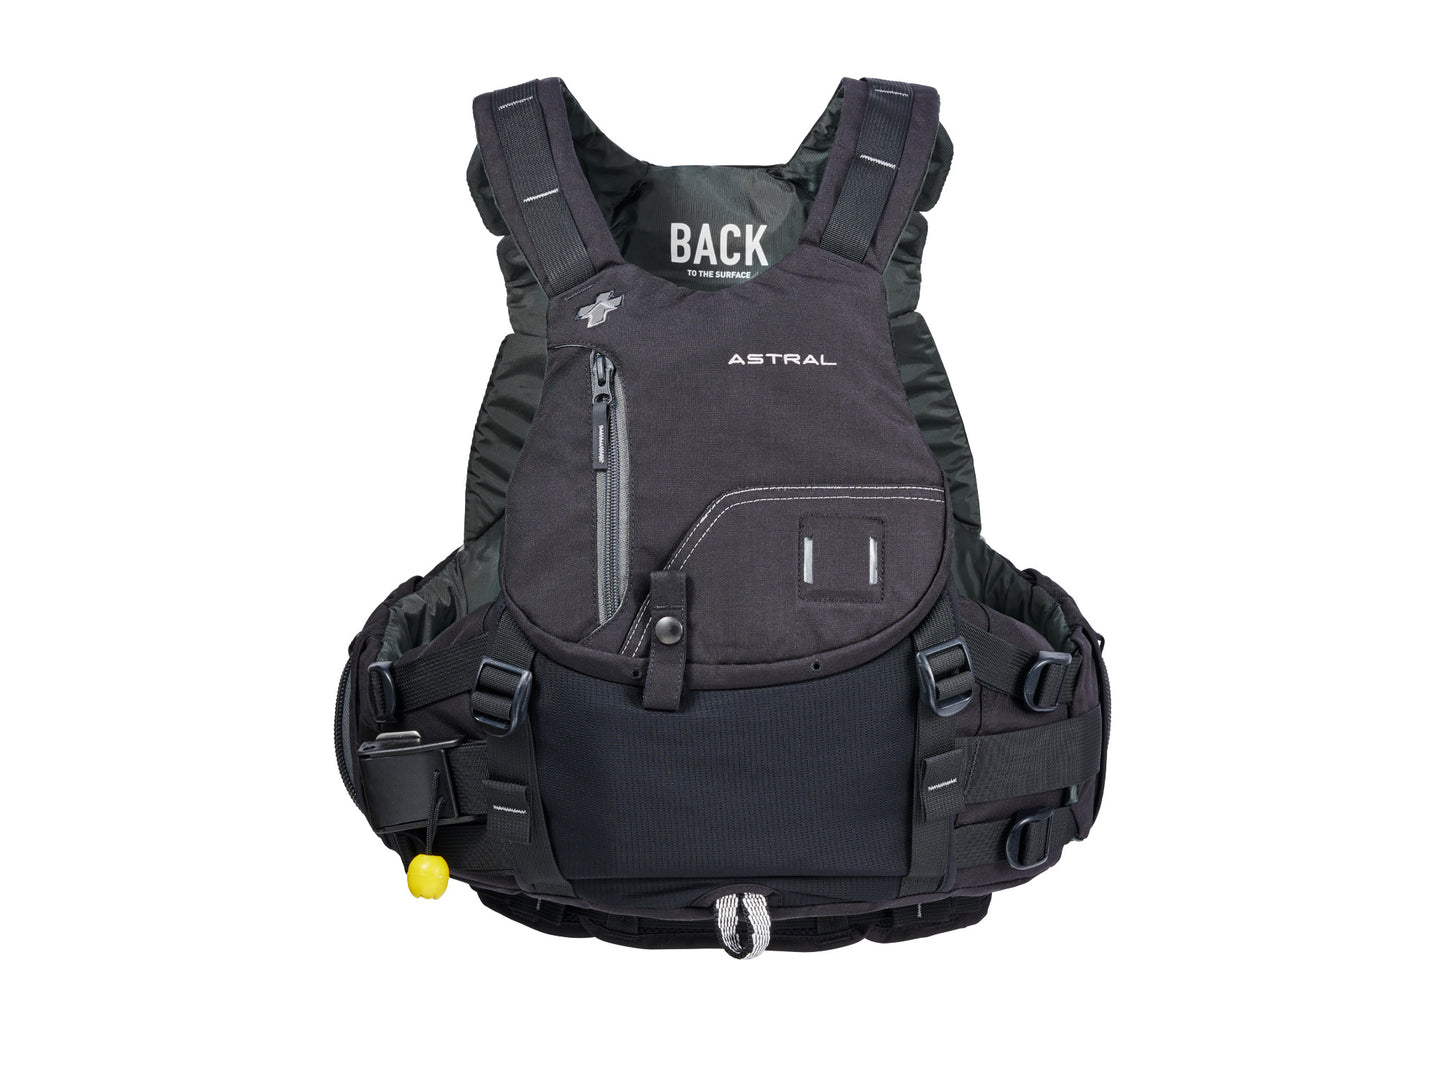 A black vest with a yellow tag, featuring Indus High Float Rescue PFD technology for high float.